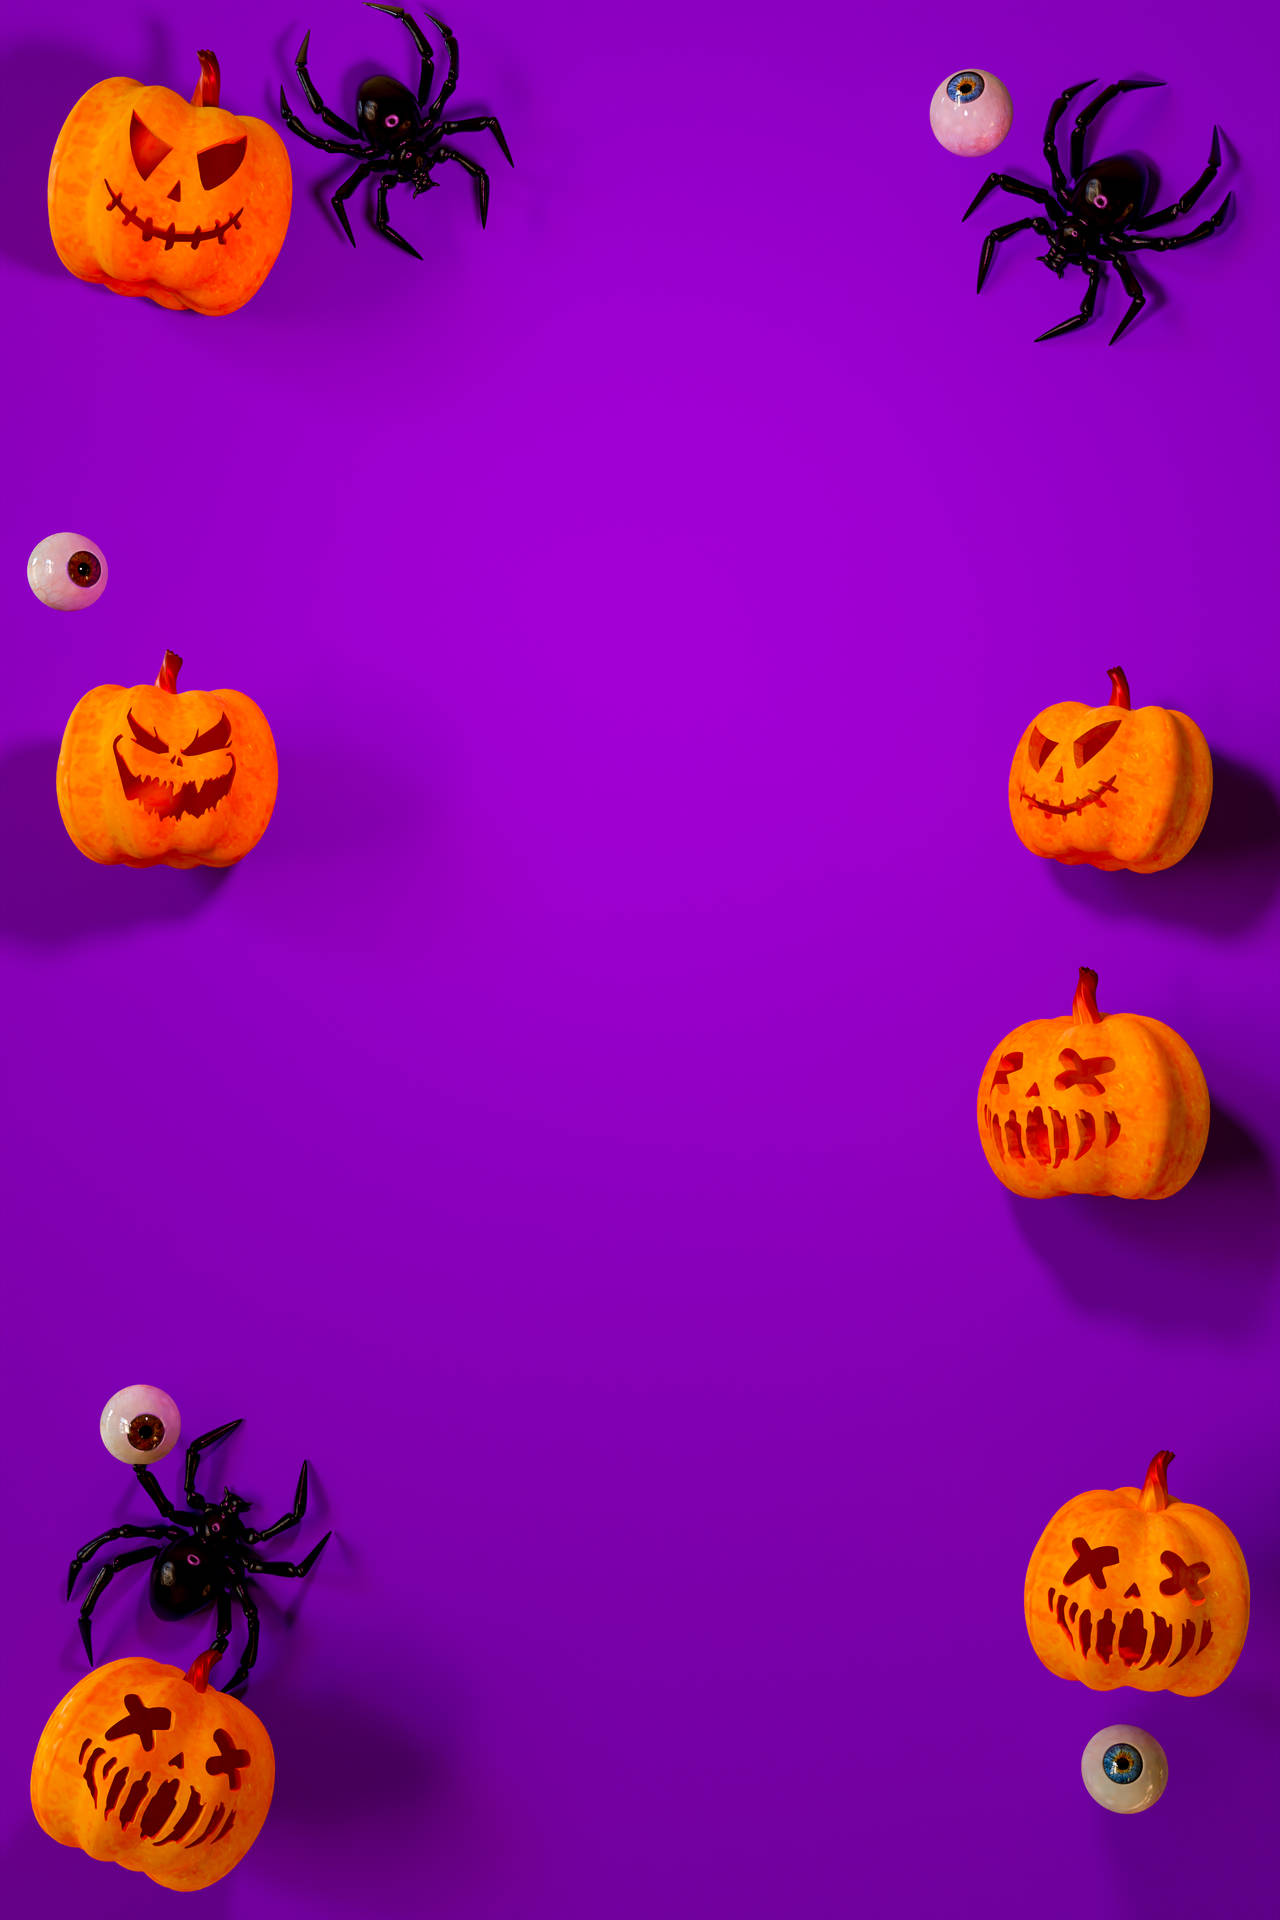 Have a spooky time this season! Wallpaper